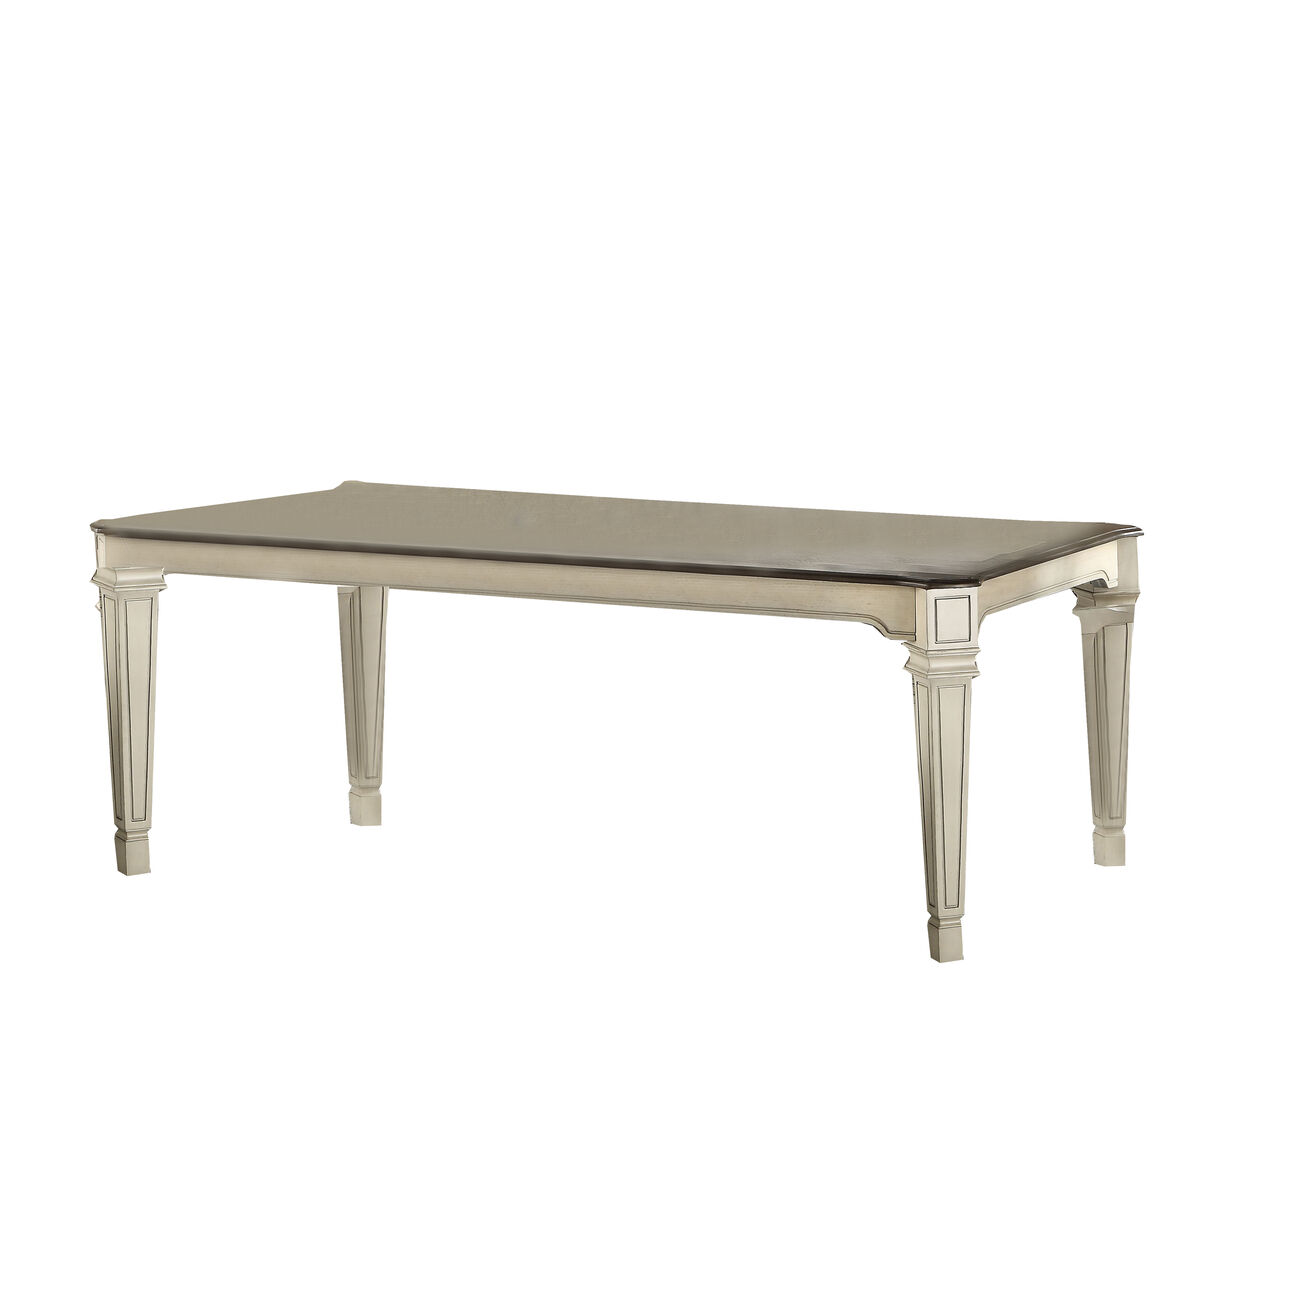 Farmhouse Extendable Dining Table with Geometric Tapered Legs,Antique White